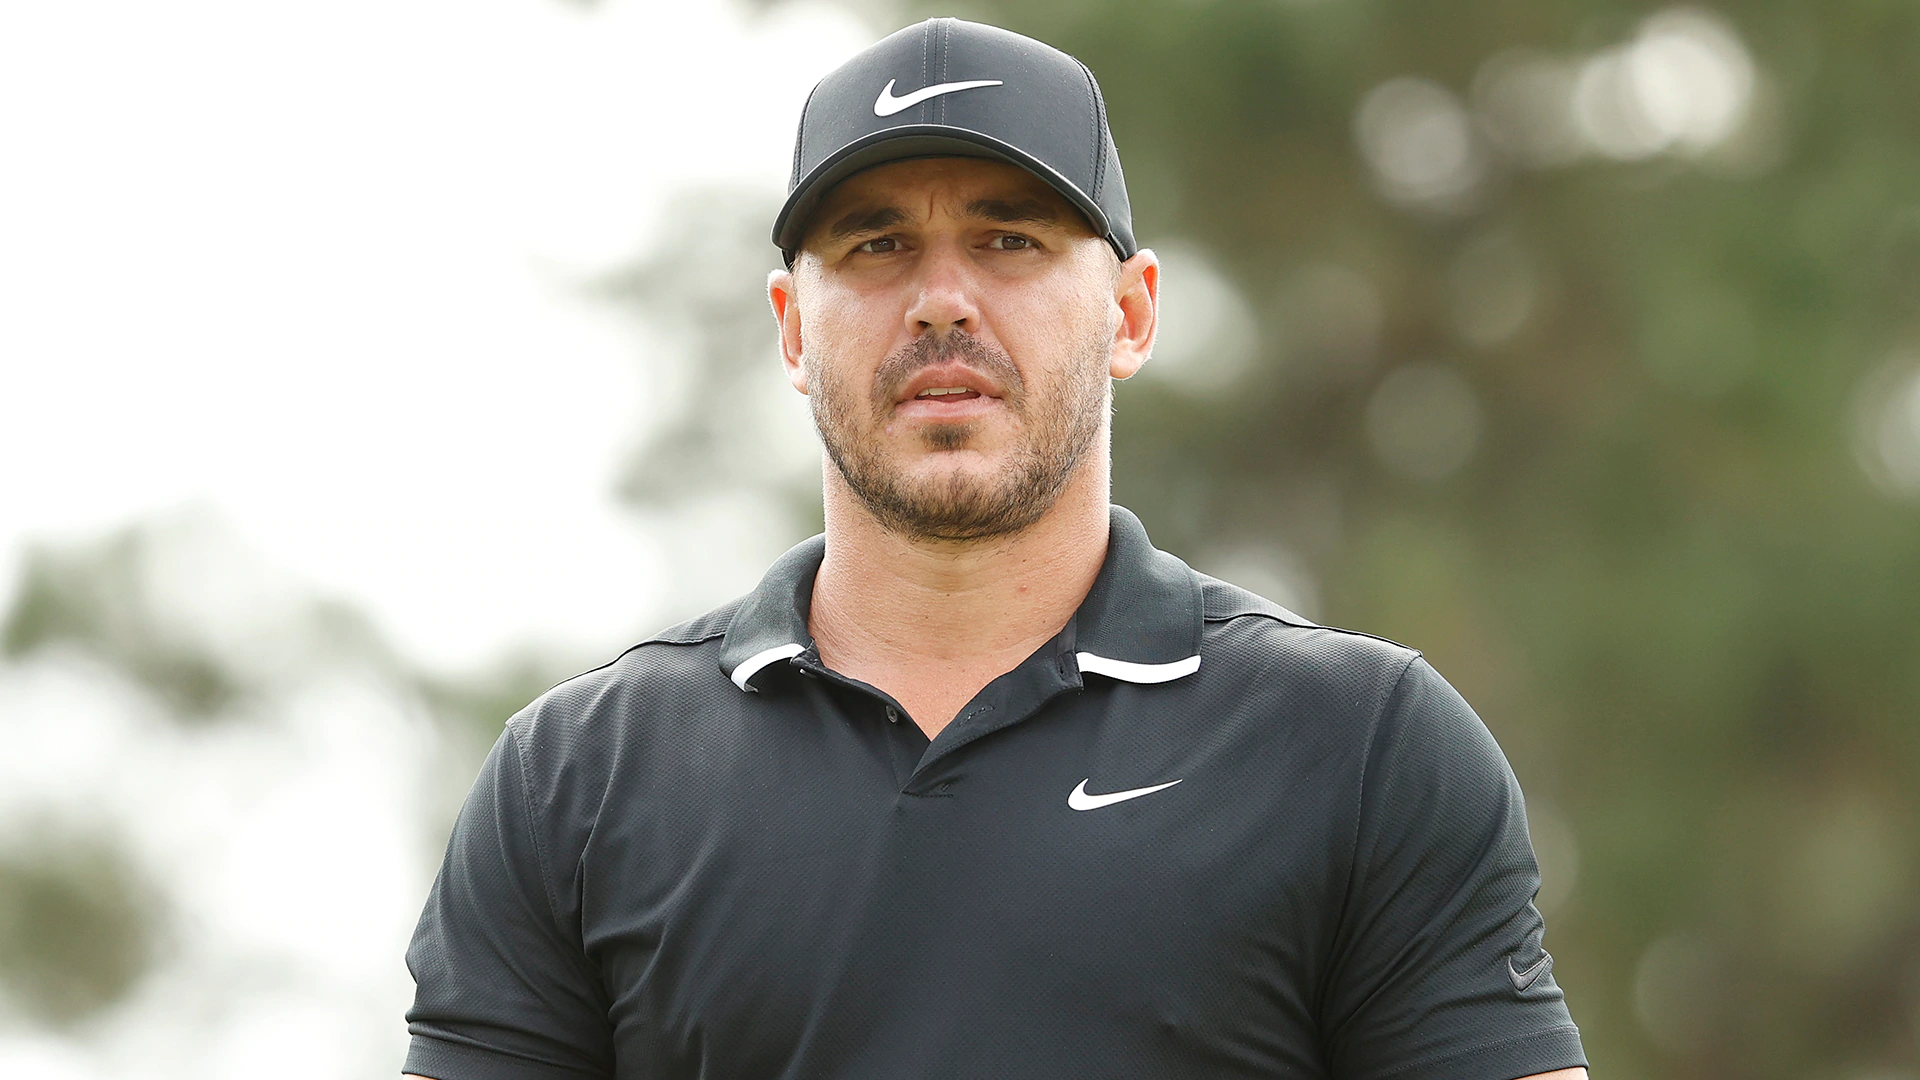 Brooks Koepka’s message: I’m back, feeling good and ready to win